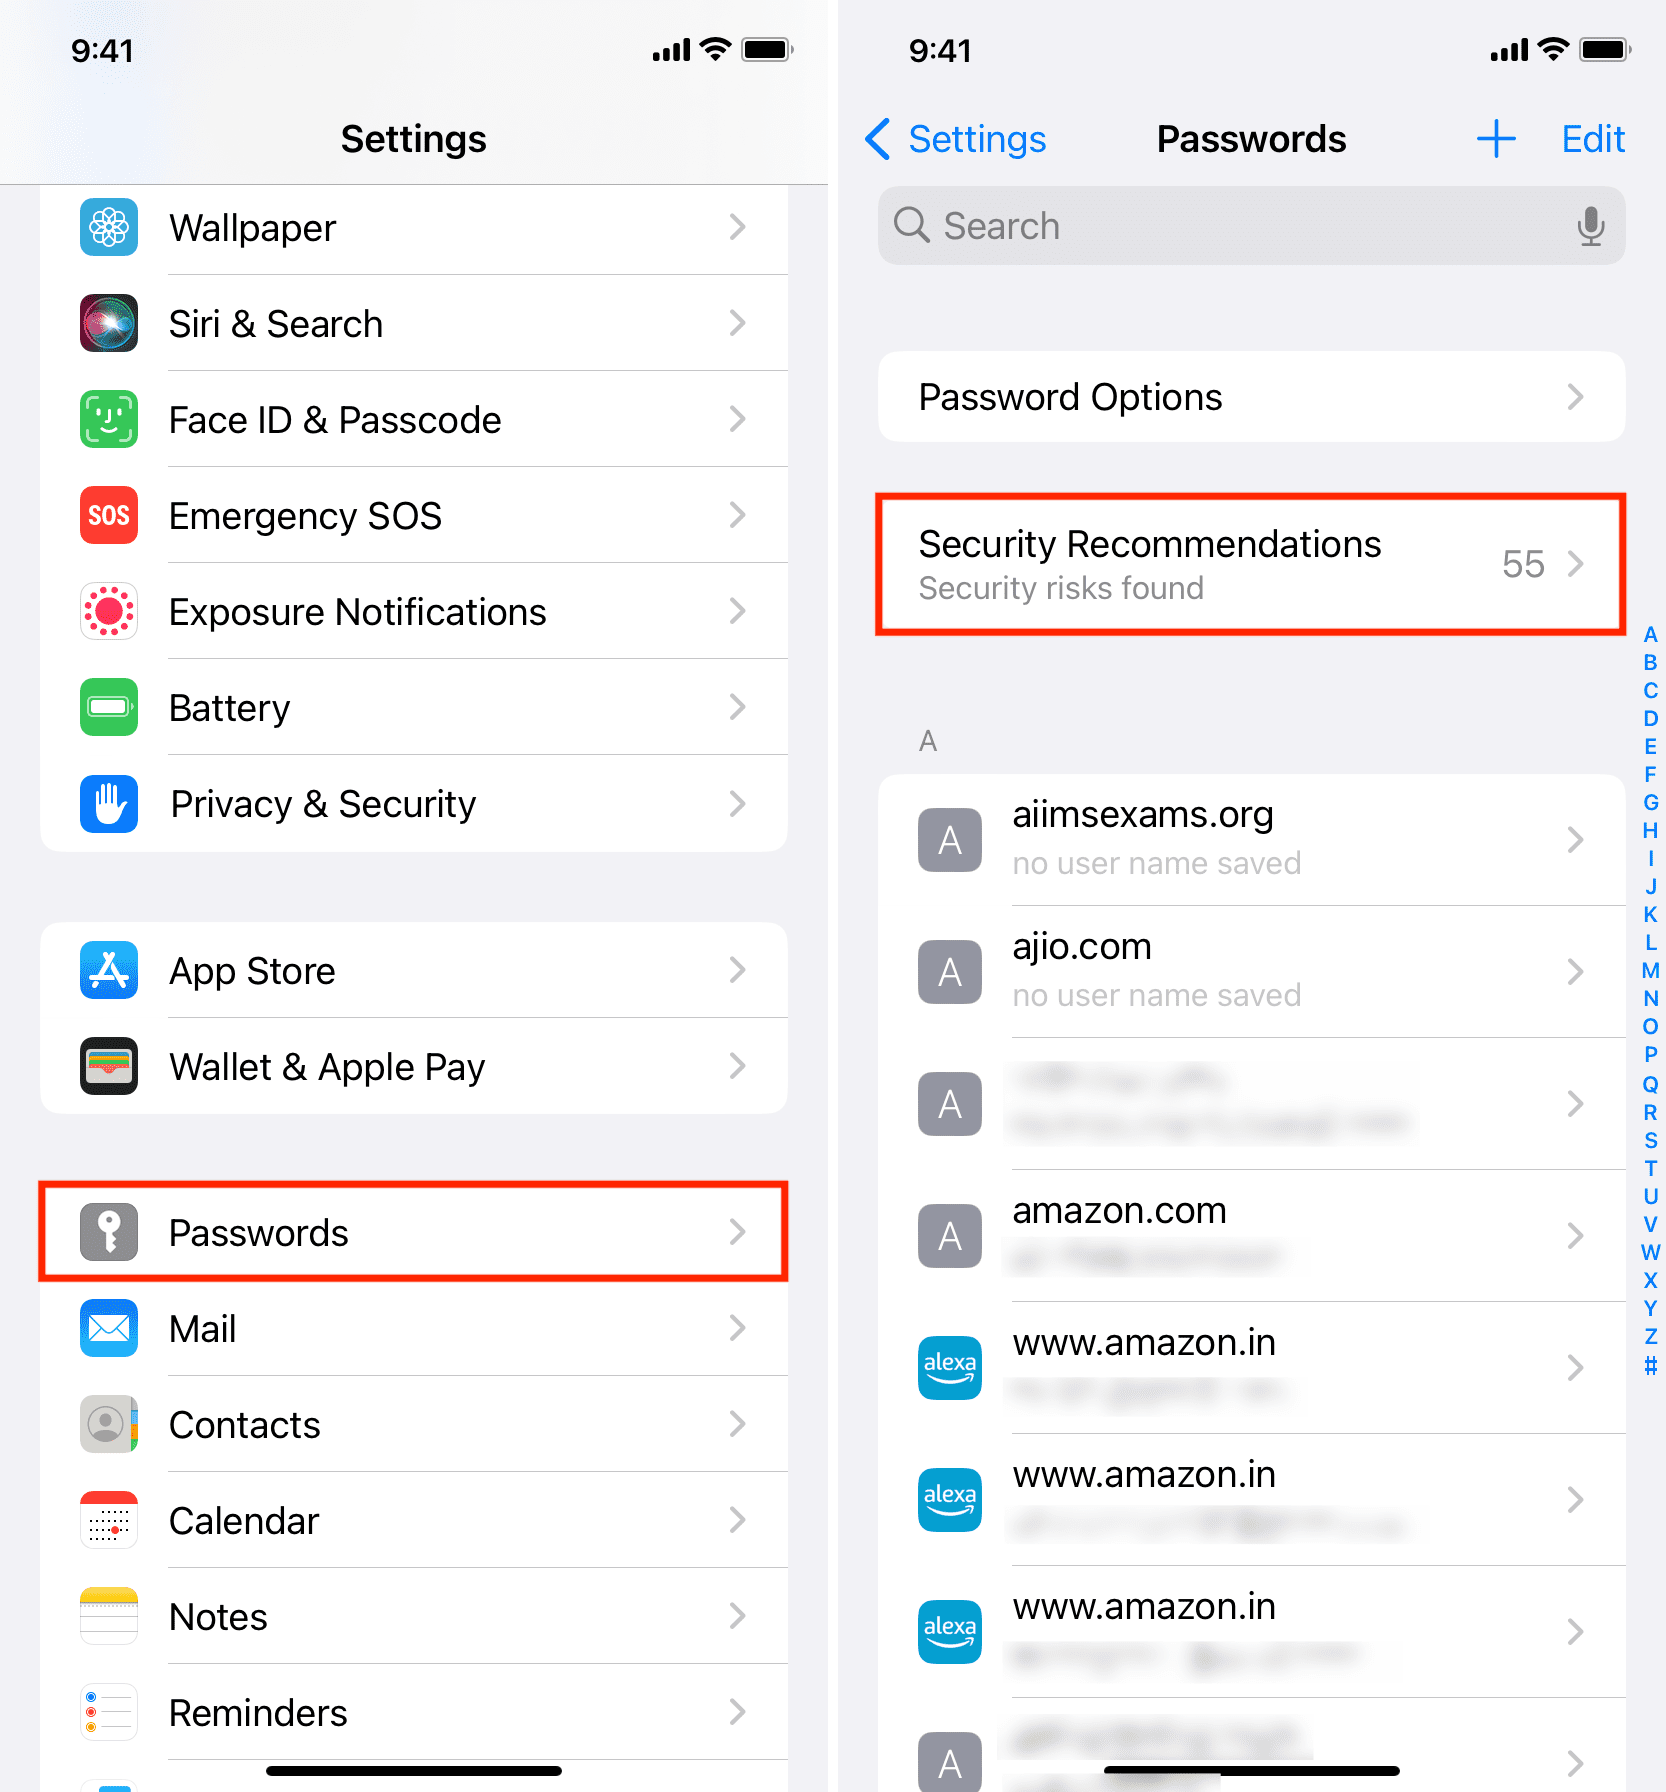 Security Recommendations in iPhone Passwords Settings